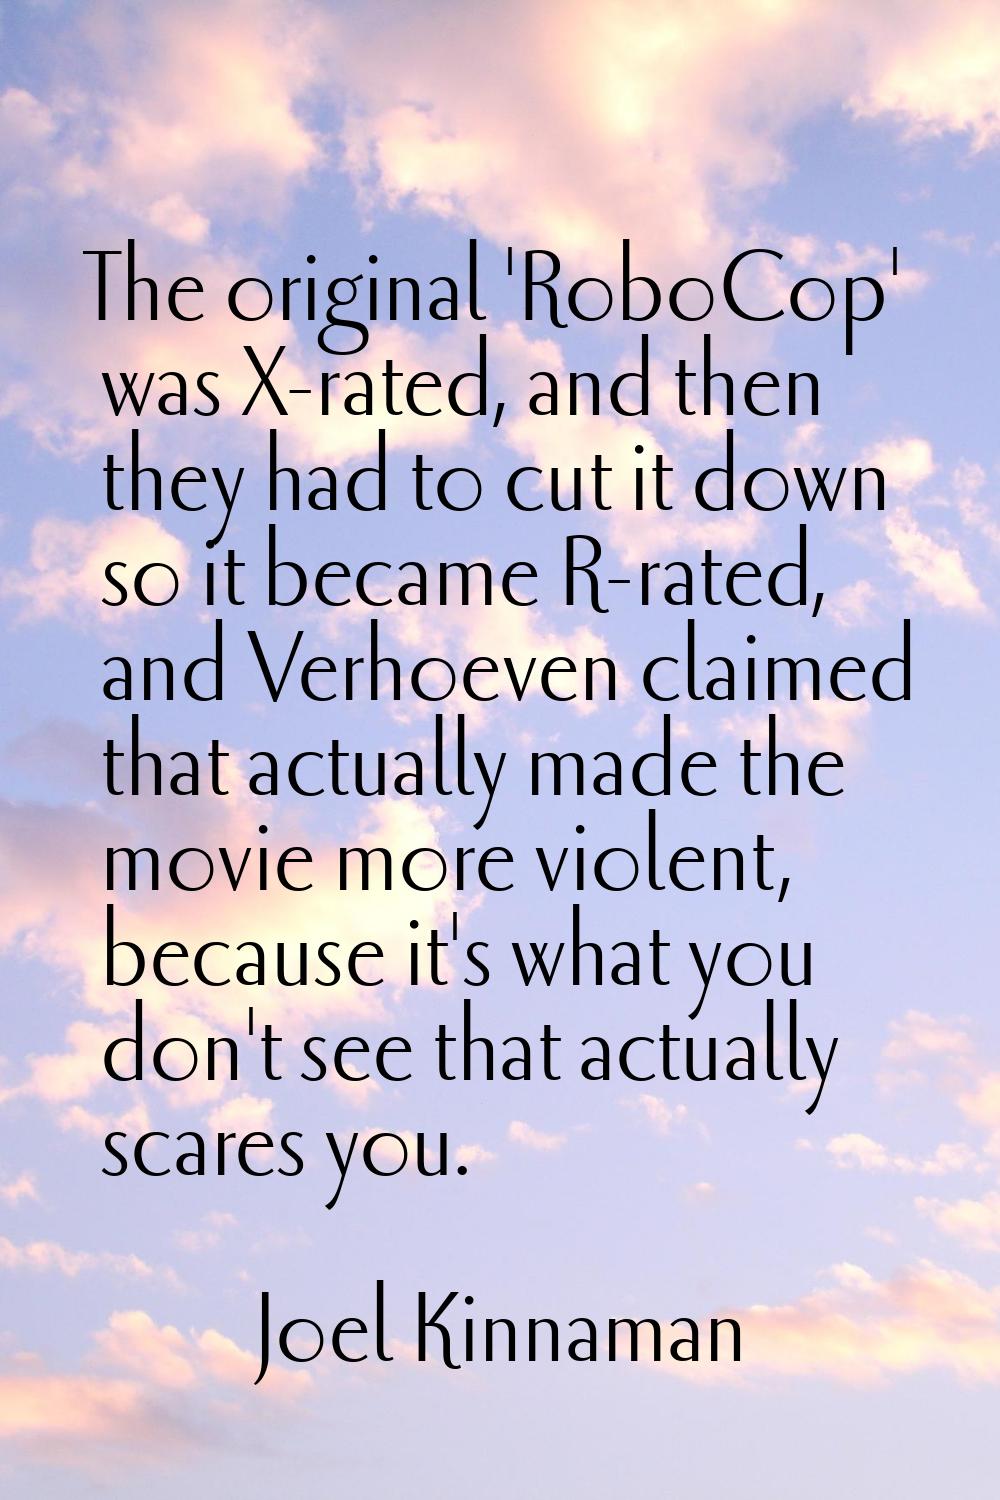 The original 'RoboCop' was X-rated, and then they had to cut it down so it became R-rated, and Verh